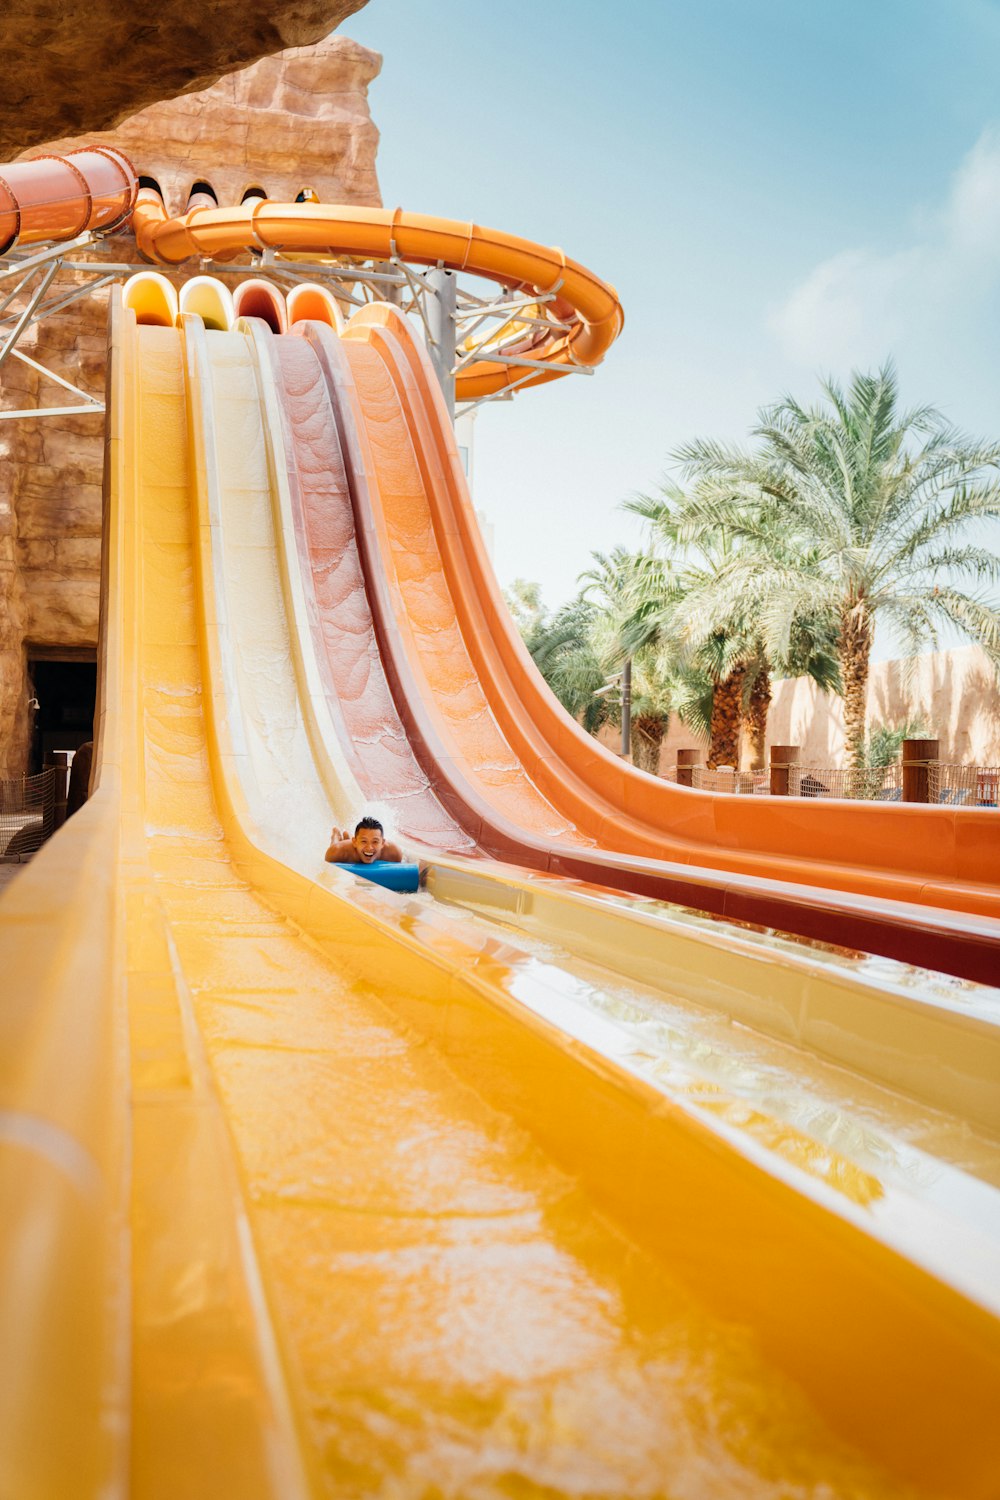 a man riding a water slide in a water park